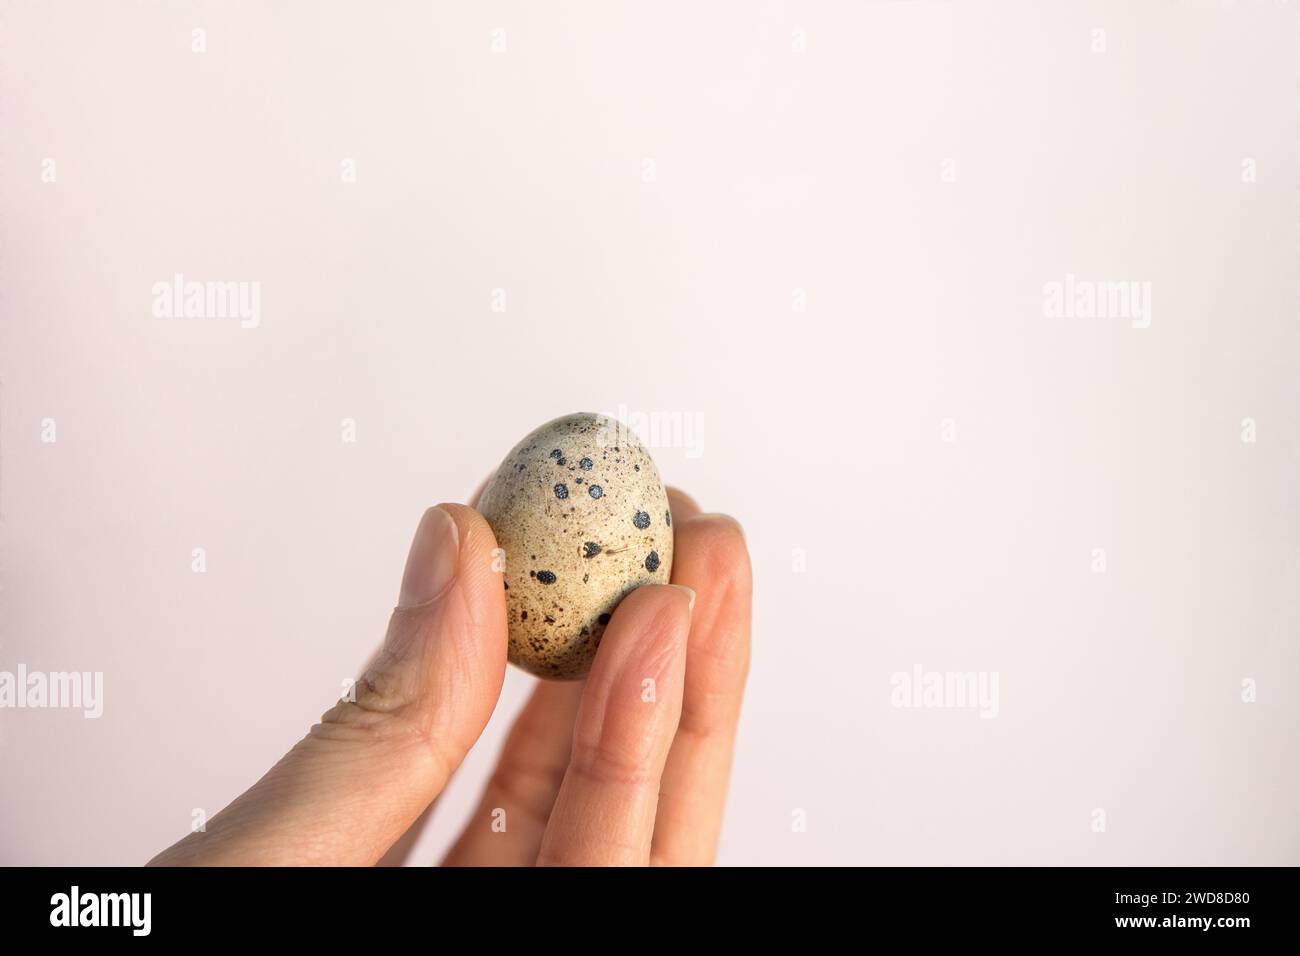 Closeup of person's hand holding a small quail egg isolated on white background. Fragility and protection concept. Copy space. Stock Photo